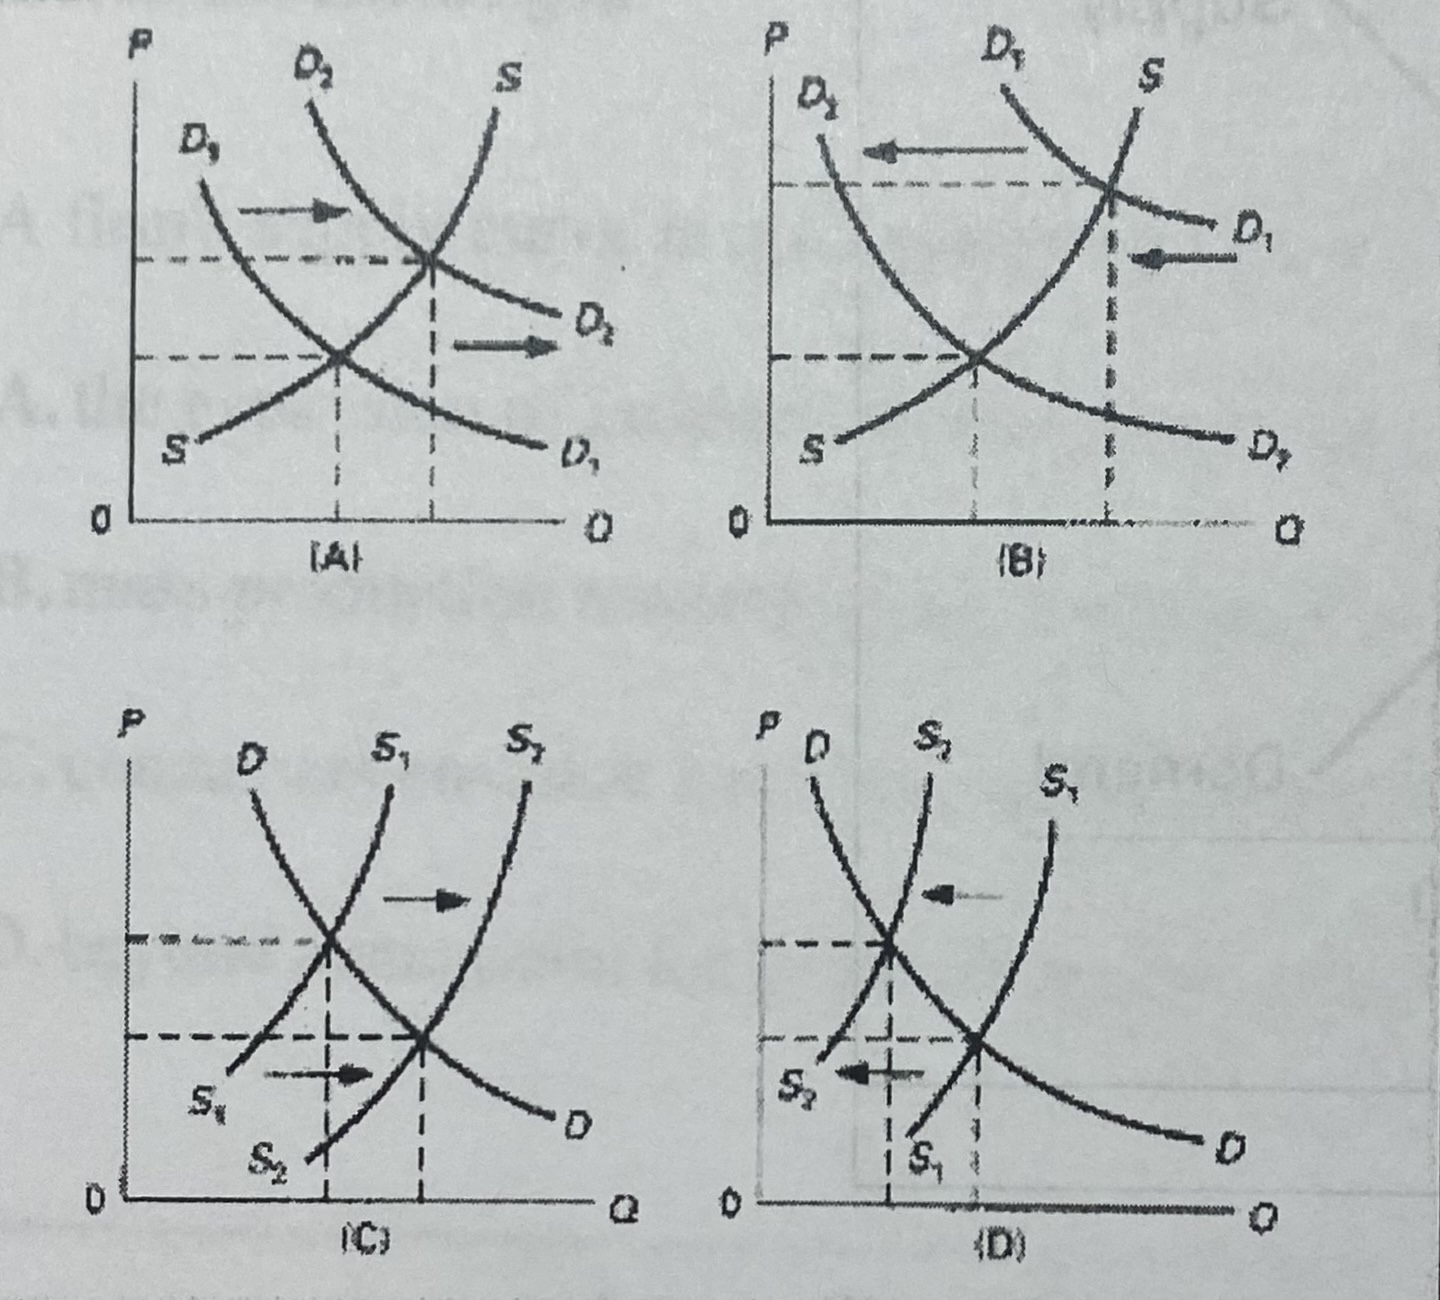 <p>Which of the above diagrams illustrates the effect of a decrease in incomes upon the market for secondhand clothing?</p>